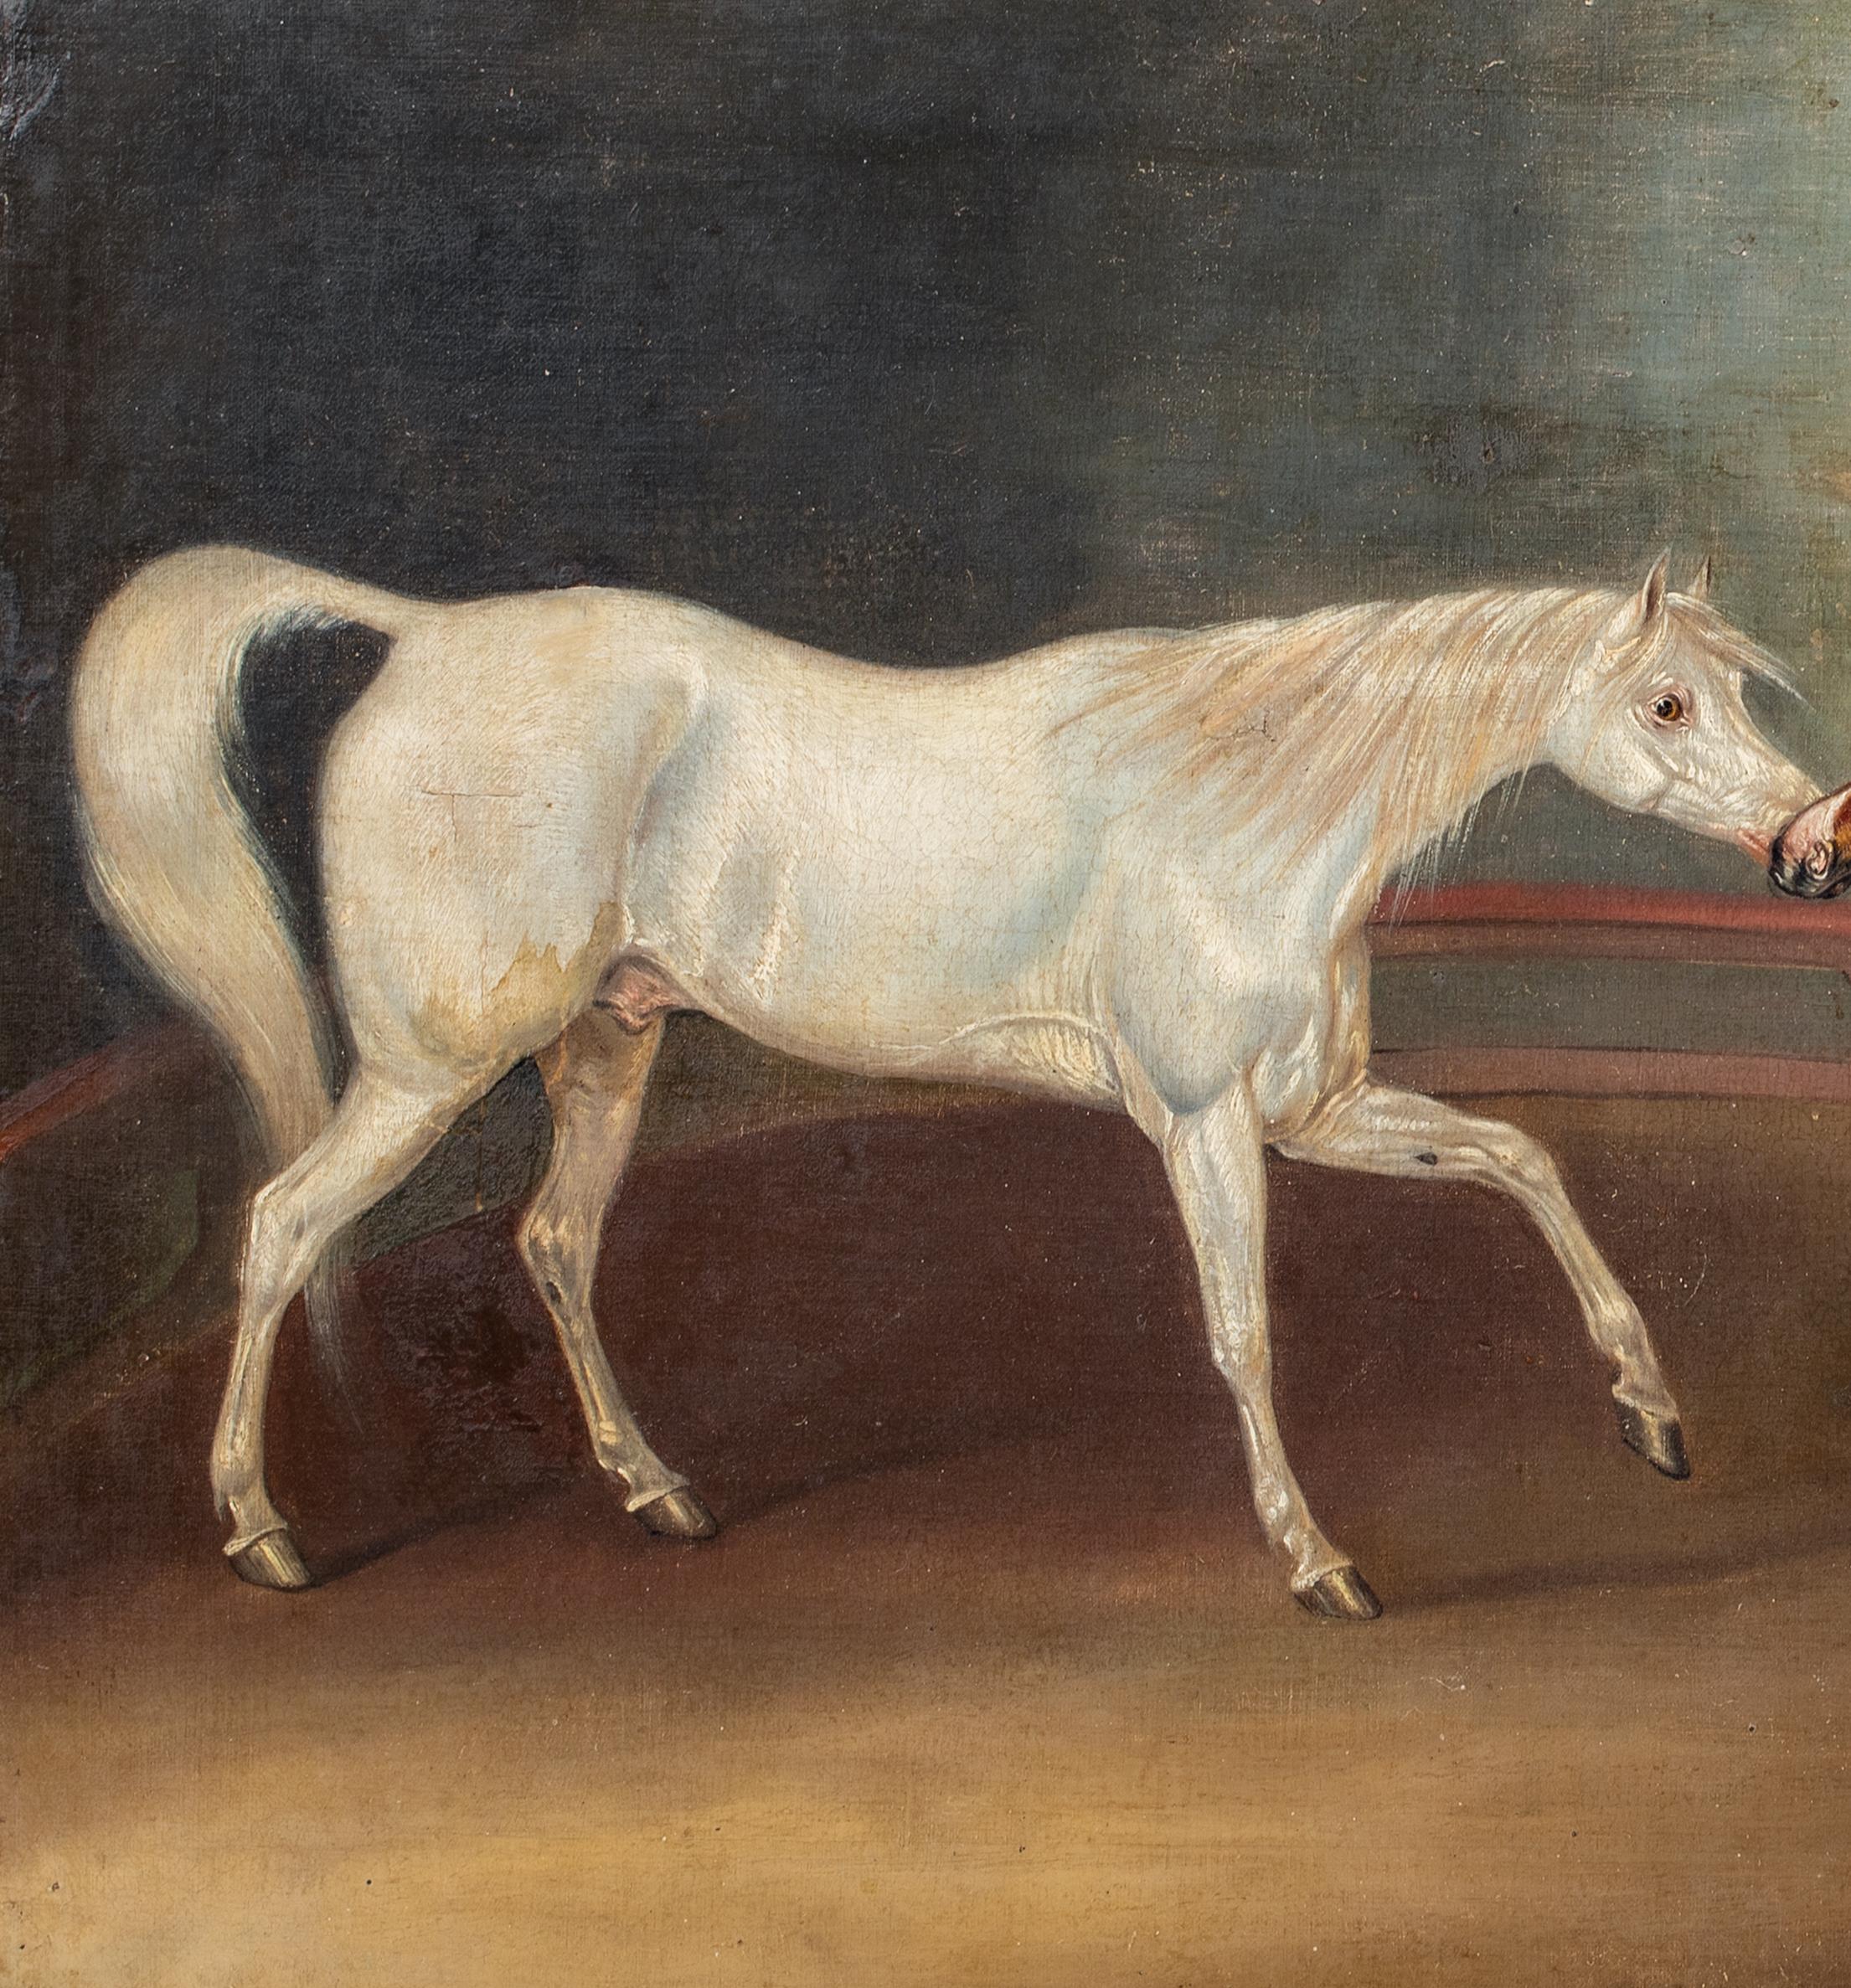 Circus Horses, 19th Century

by James WARD (1769-1859) sales to $775,000

Large 19th Century English portrait of two circus horses in a ring, oil on canvas by James Ward. Excellent quality and condition example of the famous equestrian artists work